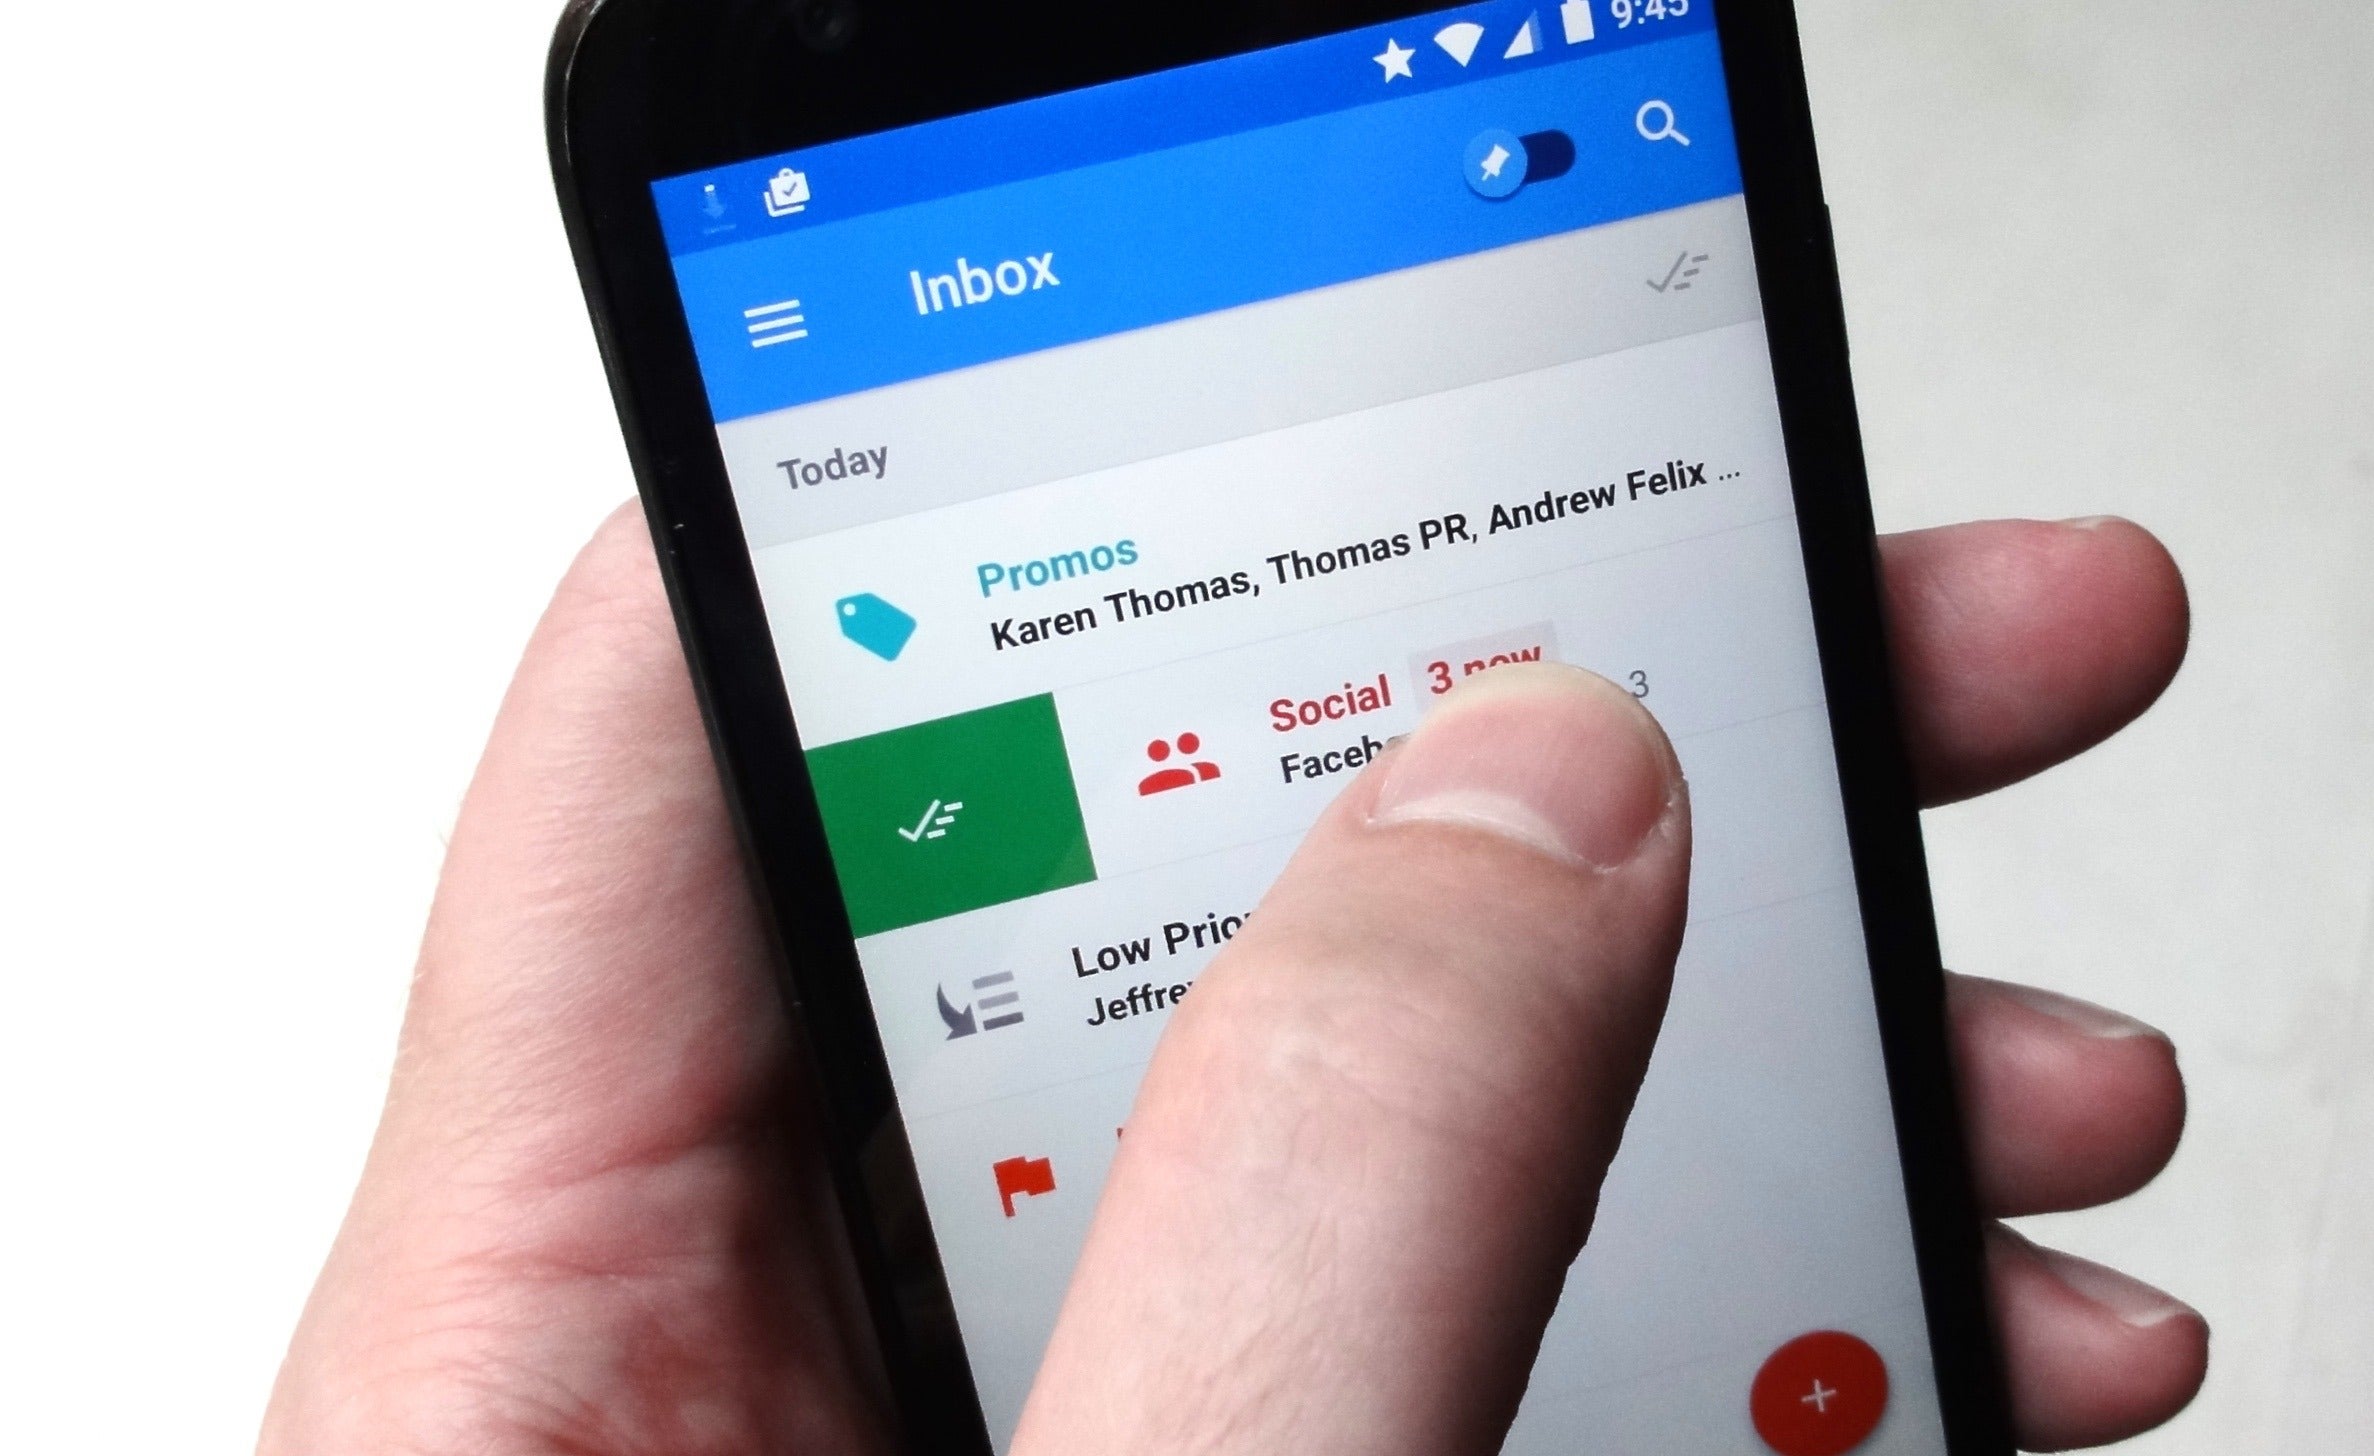 Inbox by GMAIL